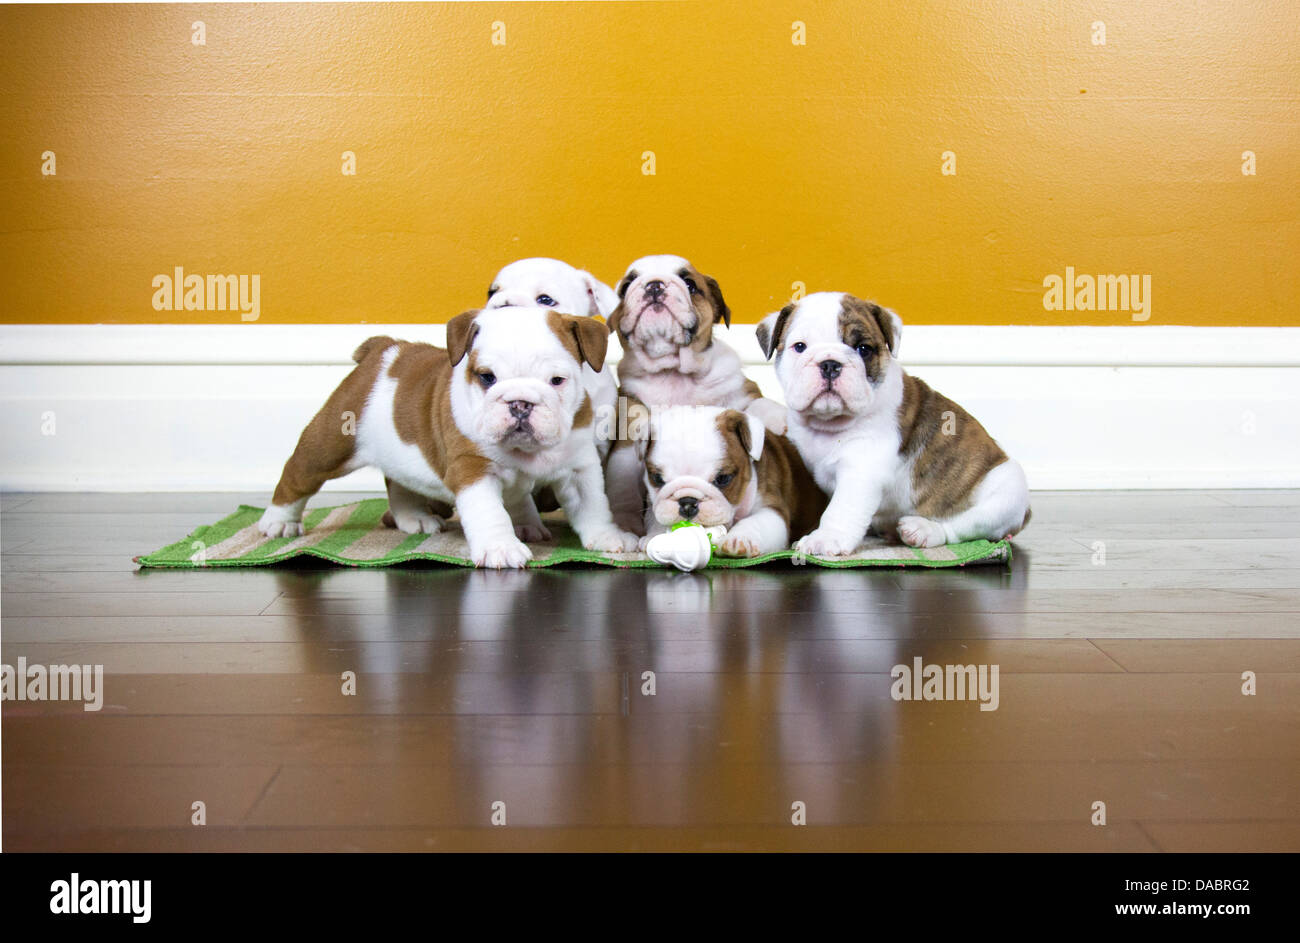 5 English Bulldog Puppies poising for a picture Stock Photo